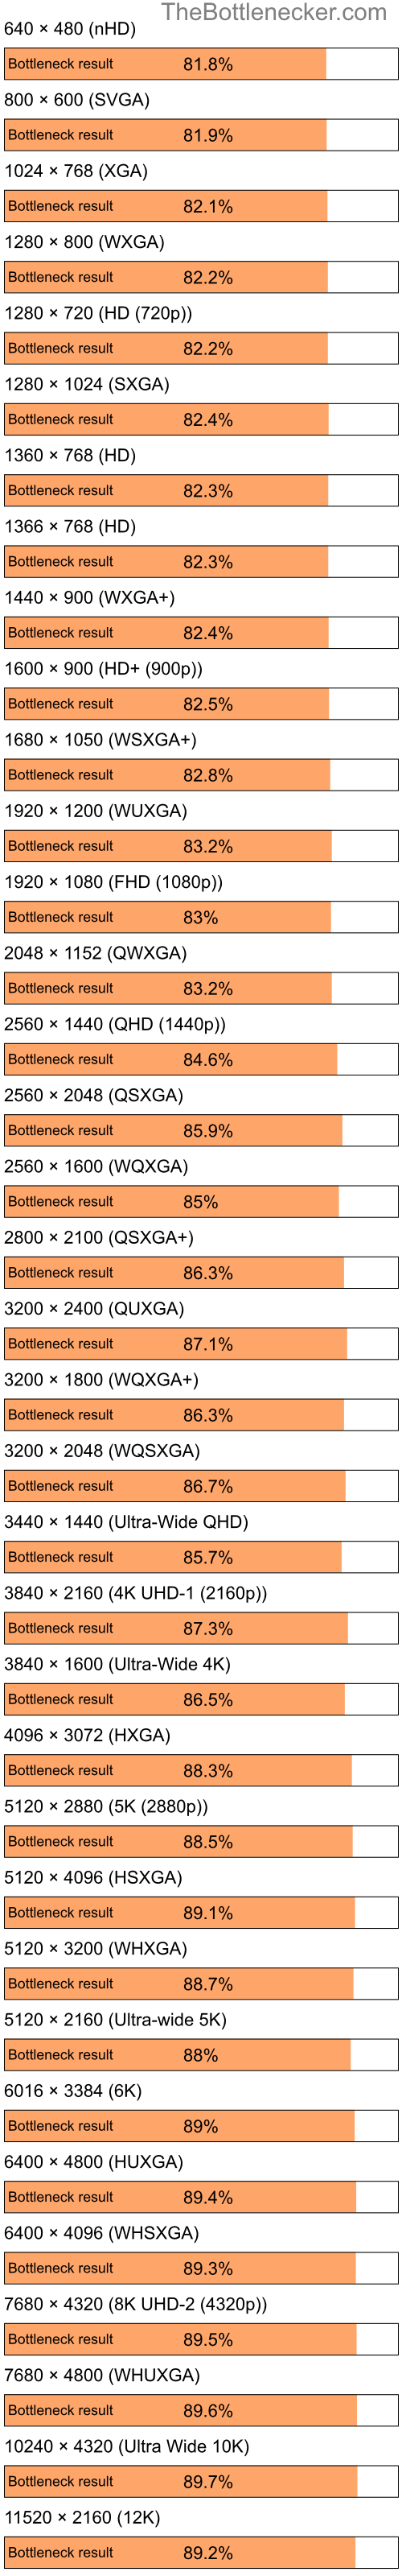 Bottleneck results by resolution for Intel Celeron M 420 and NVIDIA GeForce 6150 LE in Graphic Card Intense Tasks